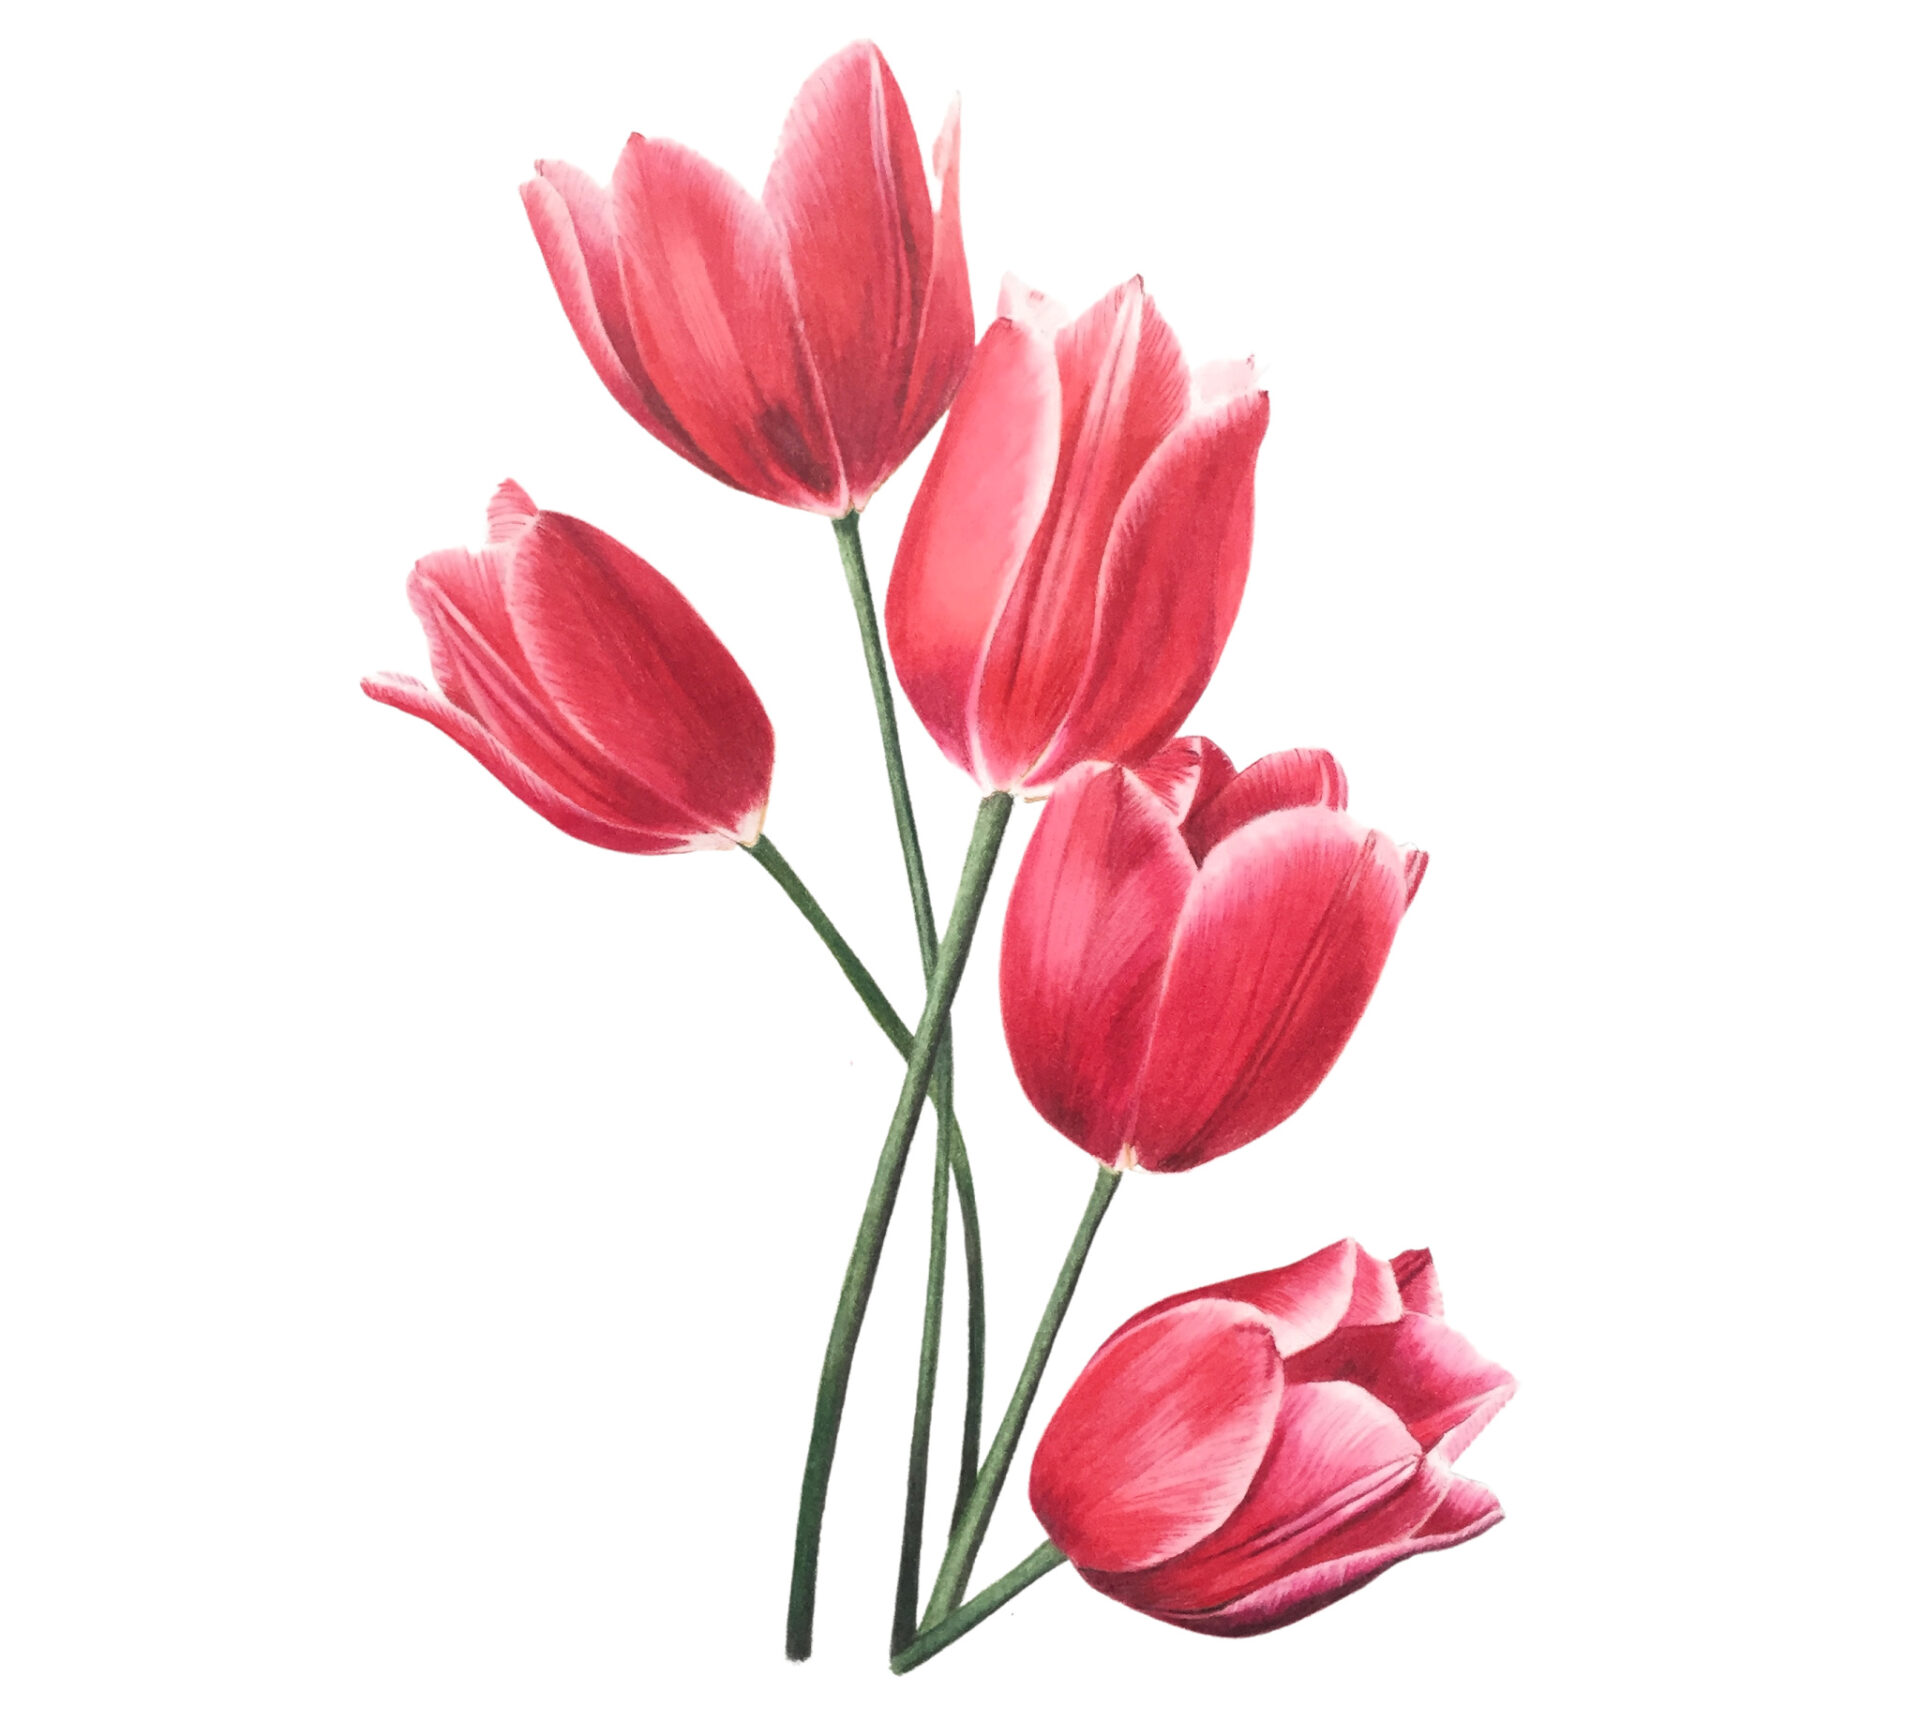 Colored Pencil Drawing of Five Pink Tulips